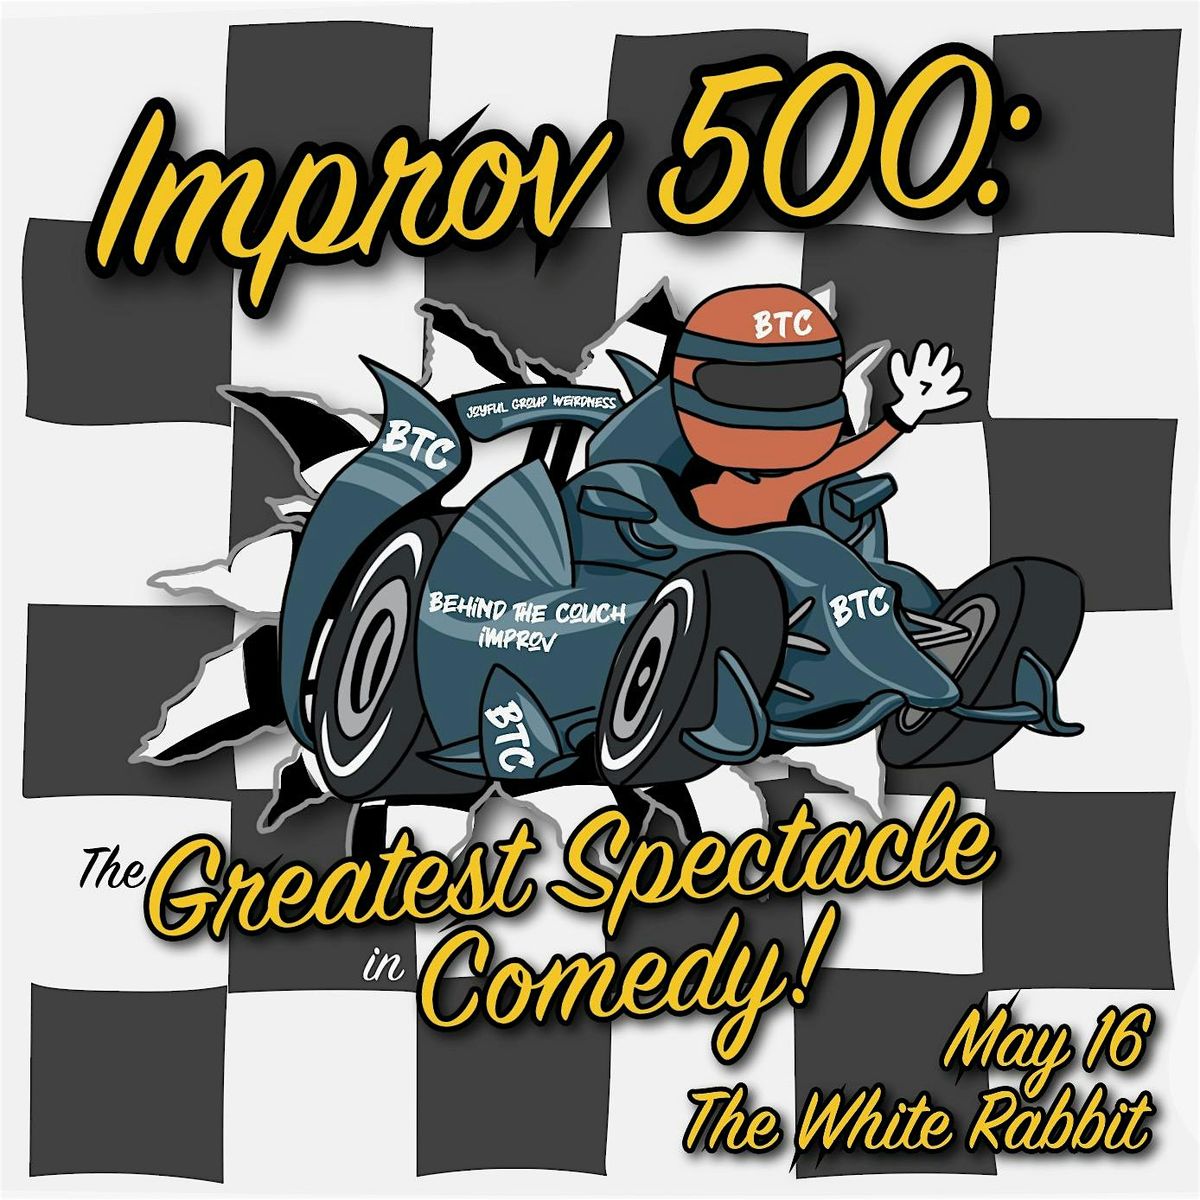 BTC presents IMPROV 500: The Greatest Spectacle in Comedy